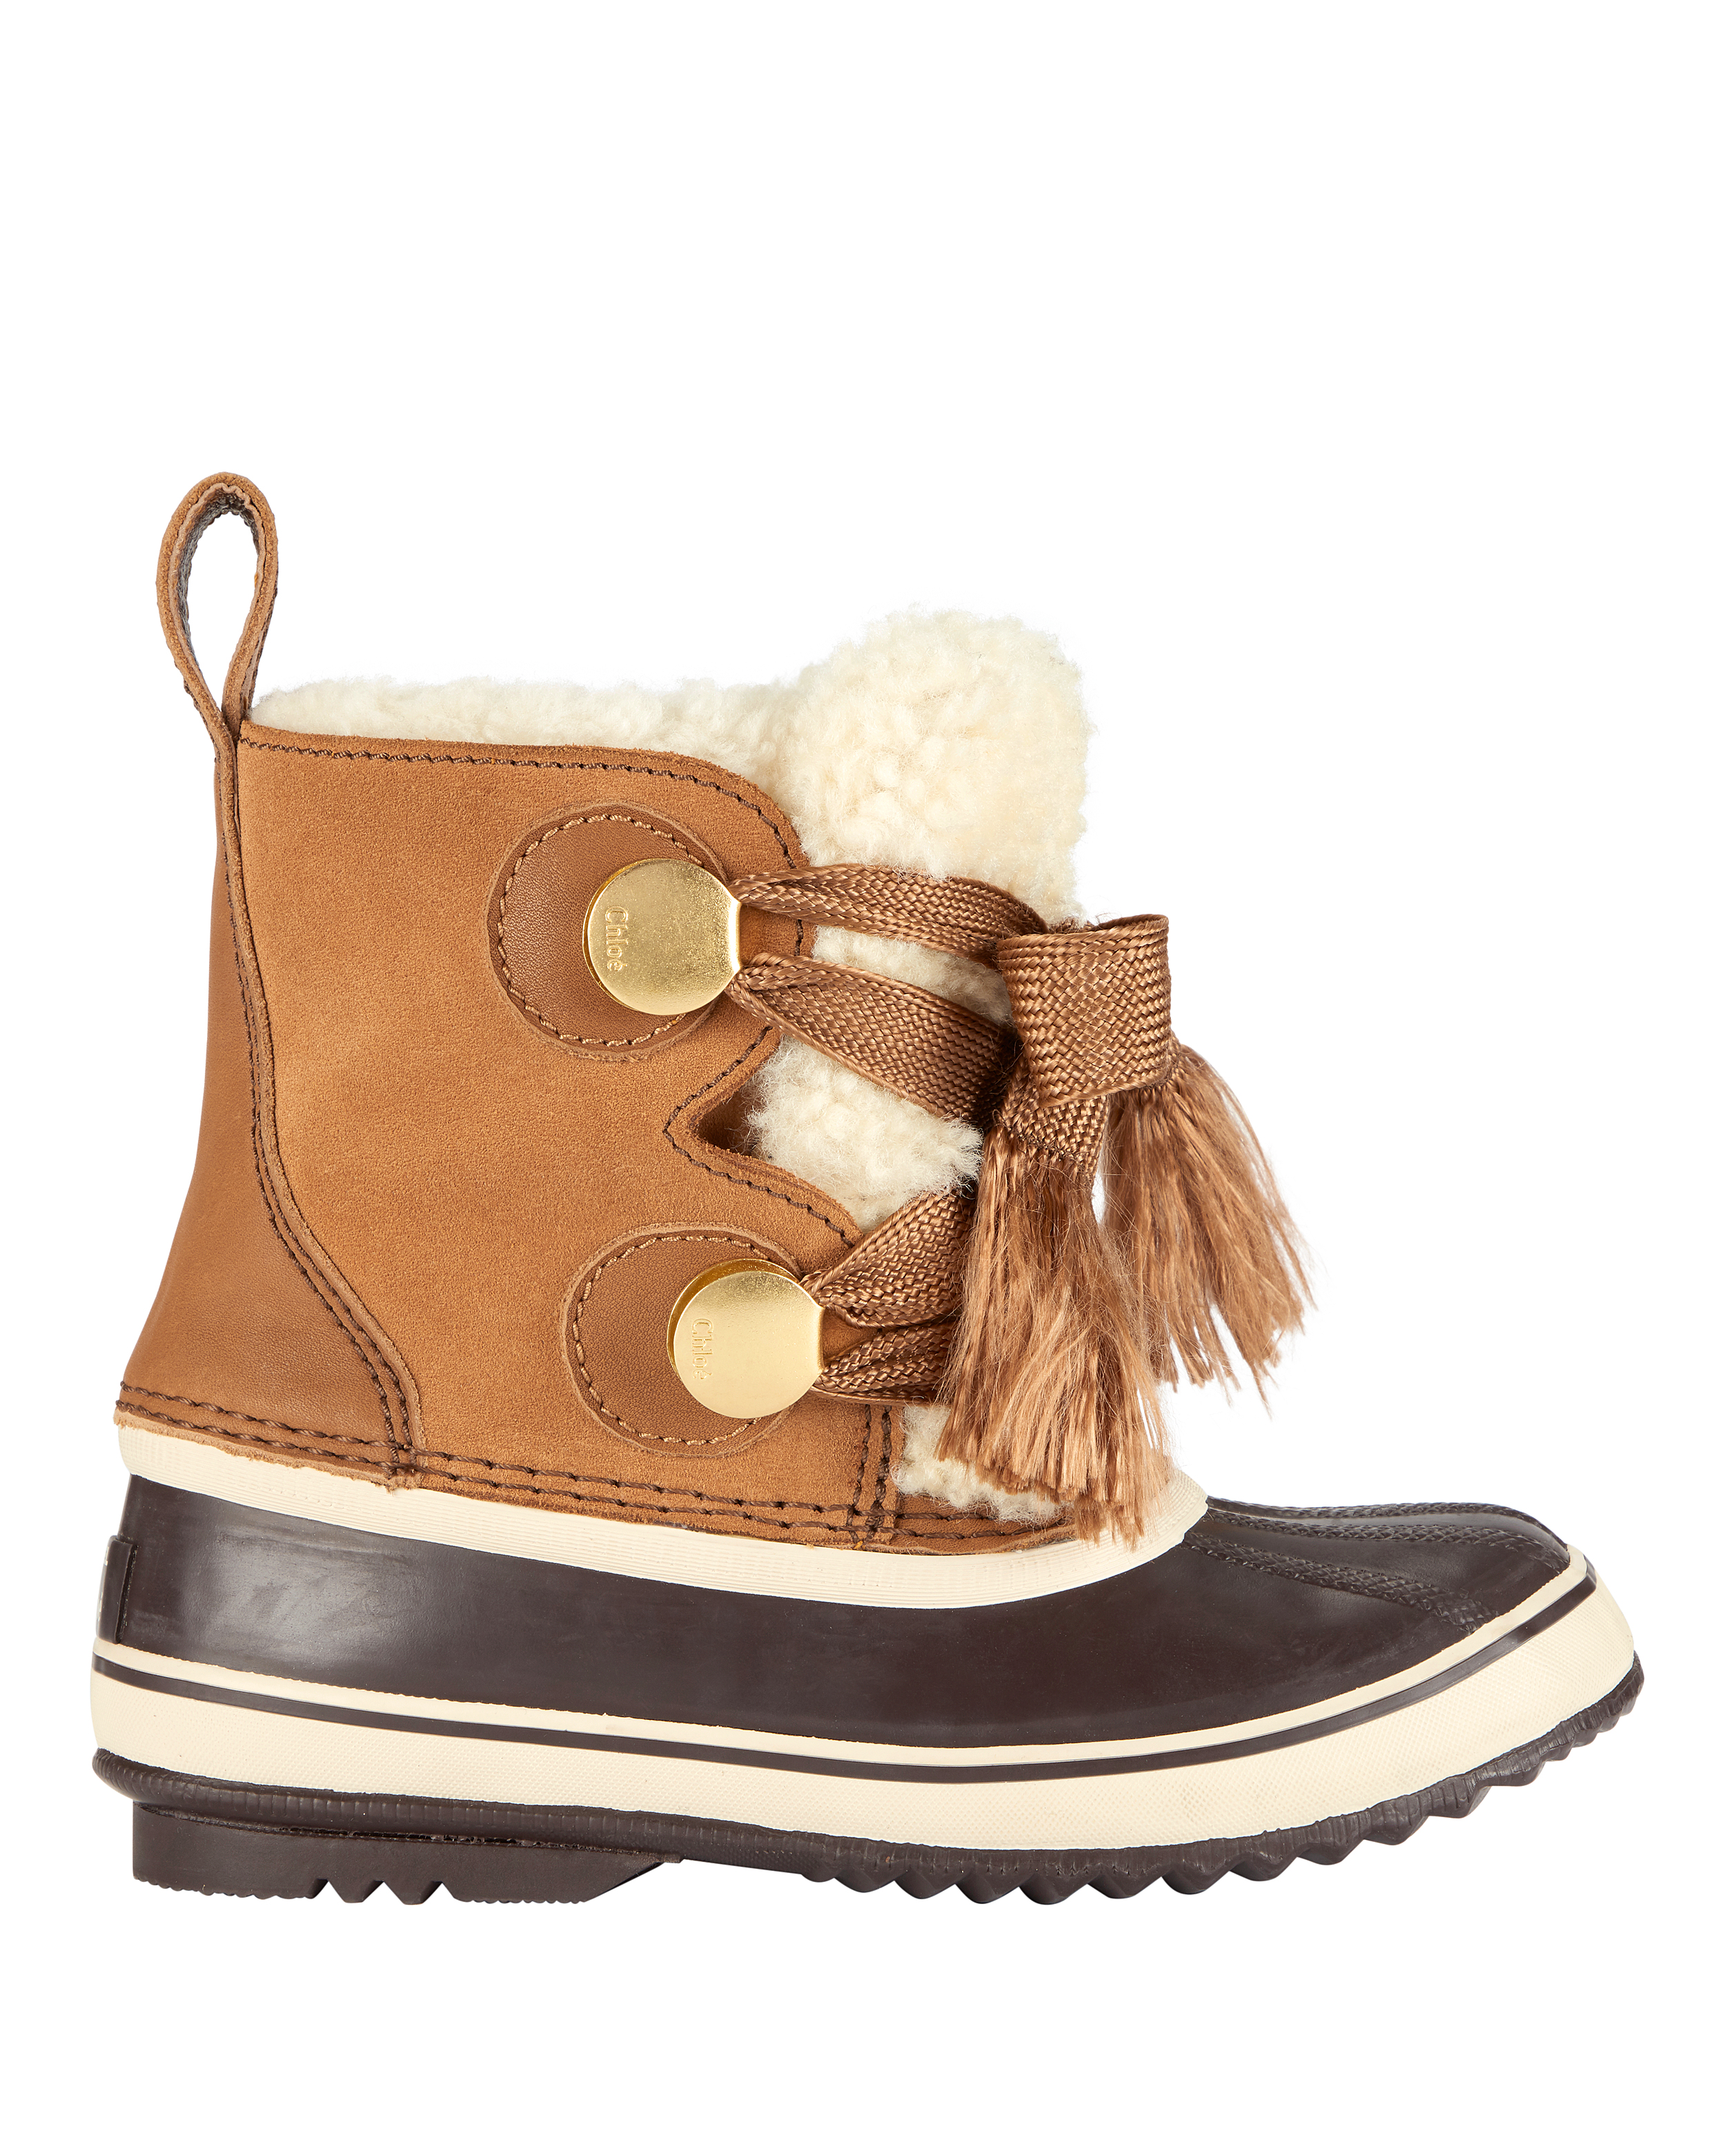 Chloé X Sorel Crosta Leather-Trimmed Suede And Shearling Boots